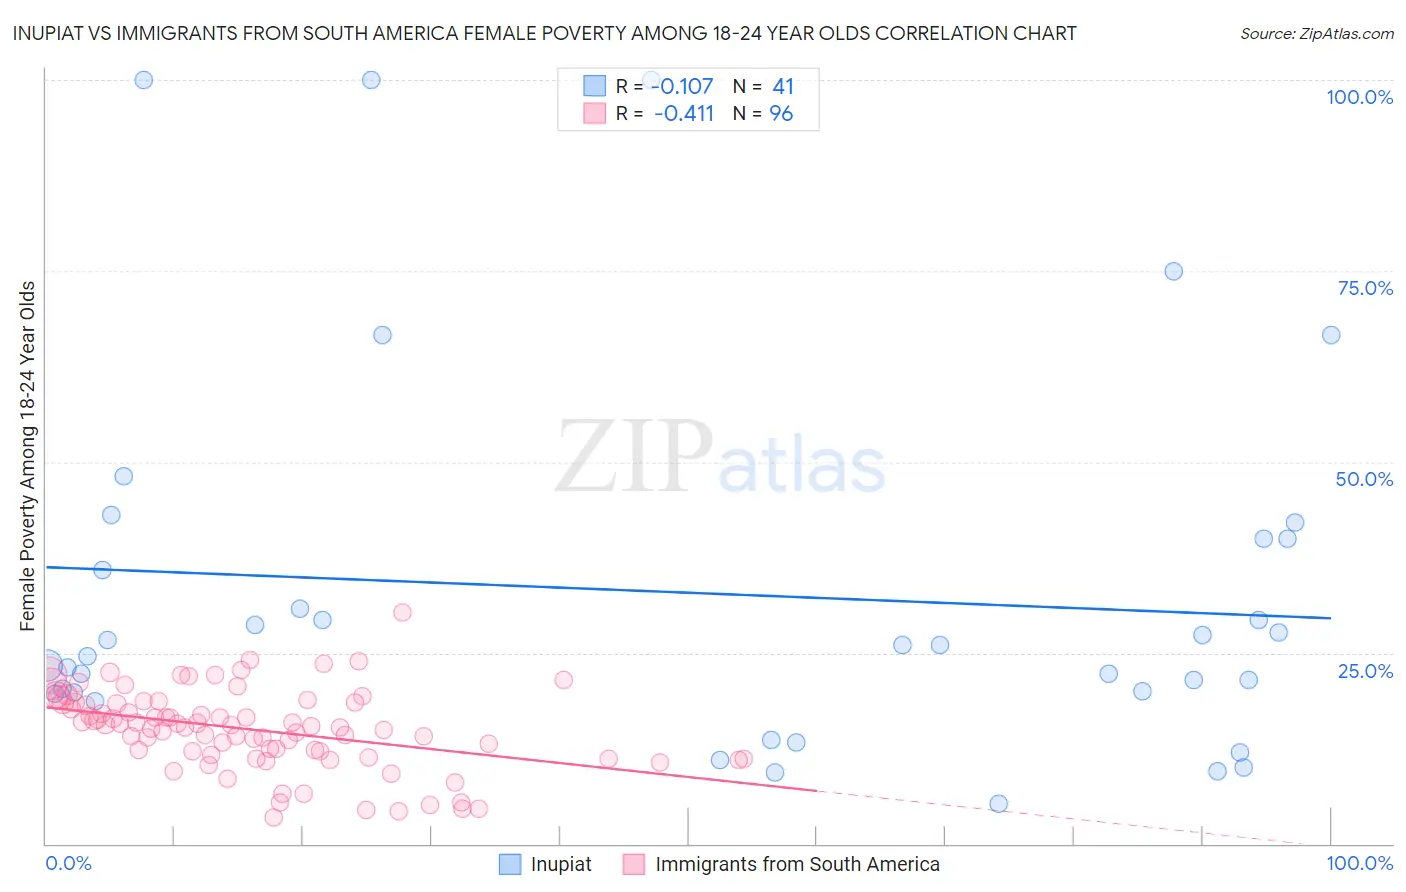 Inupiat vs Immigrants from South America Female Poverty Among 18-24 Year Olds